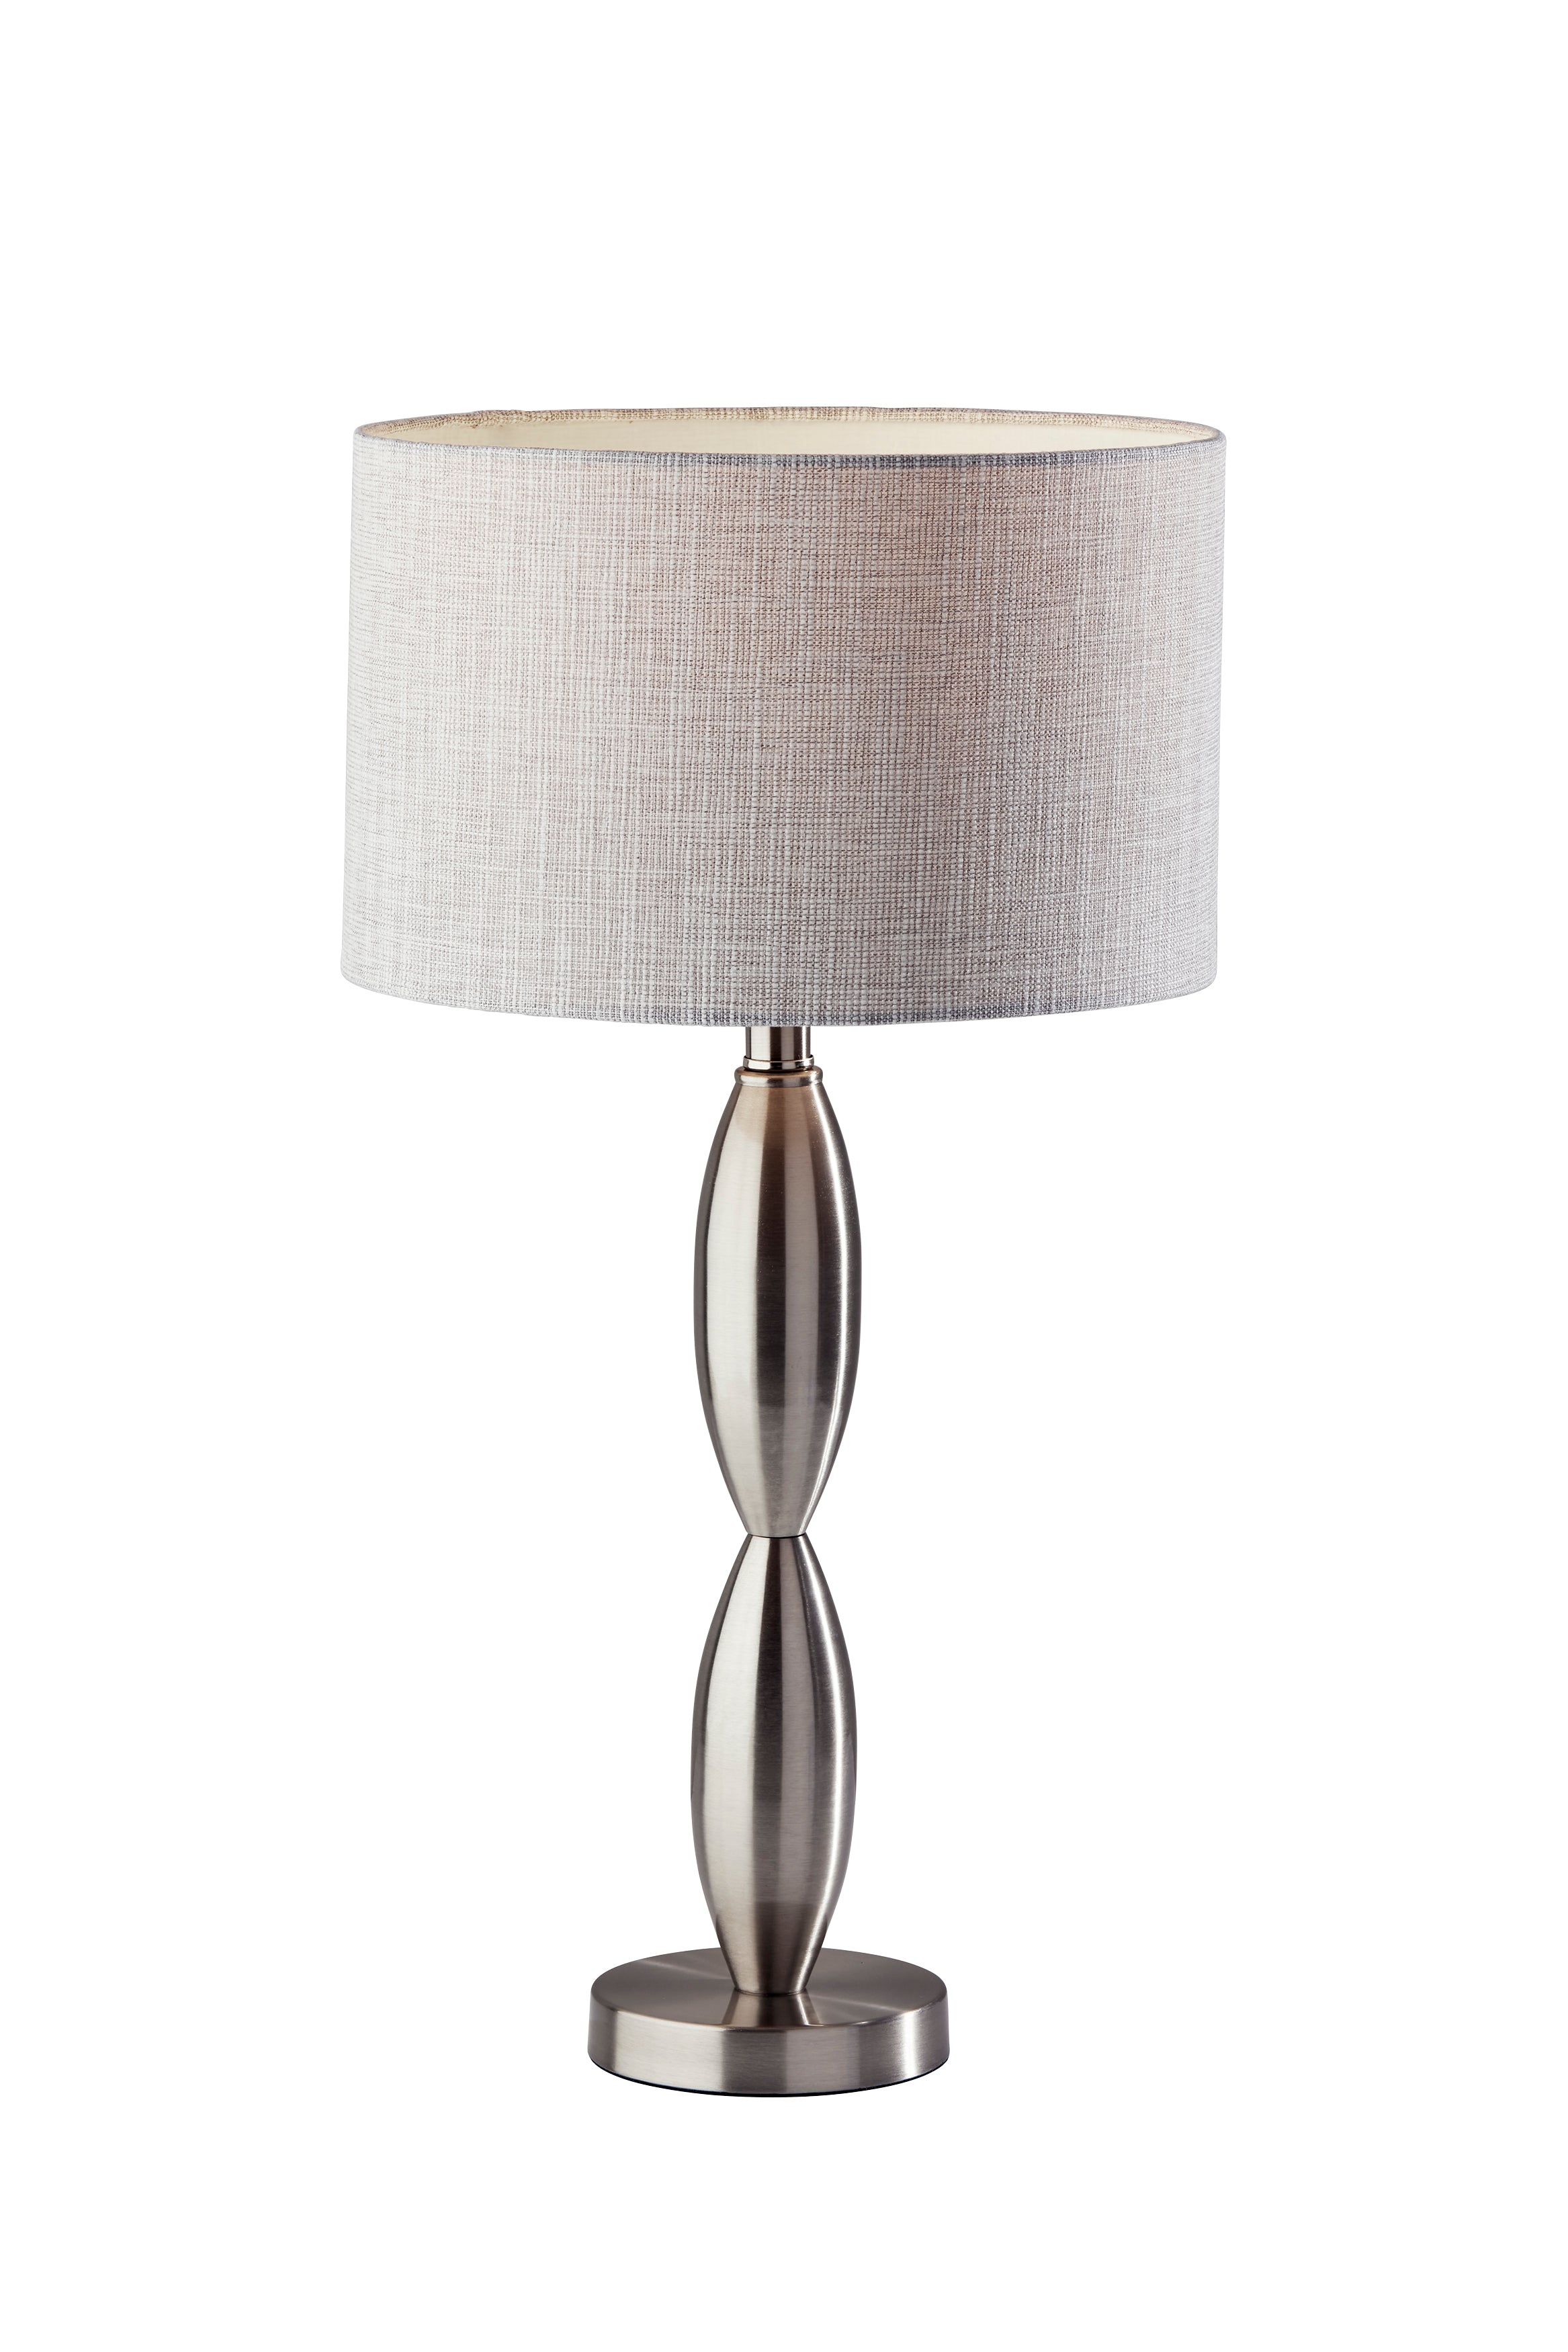 LANCE Table lamp Stainless steel - 1602-22 | ADESSO